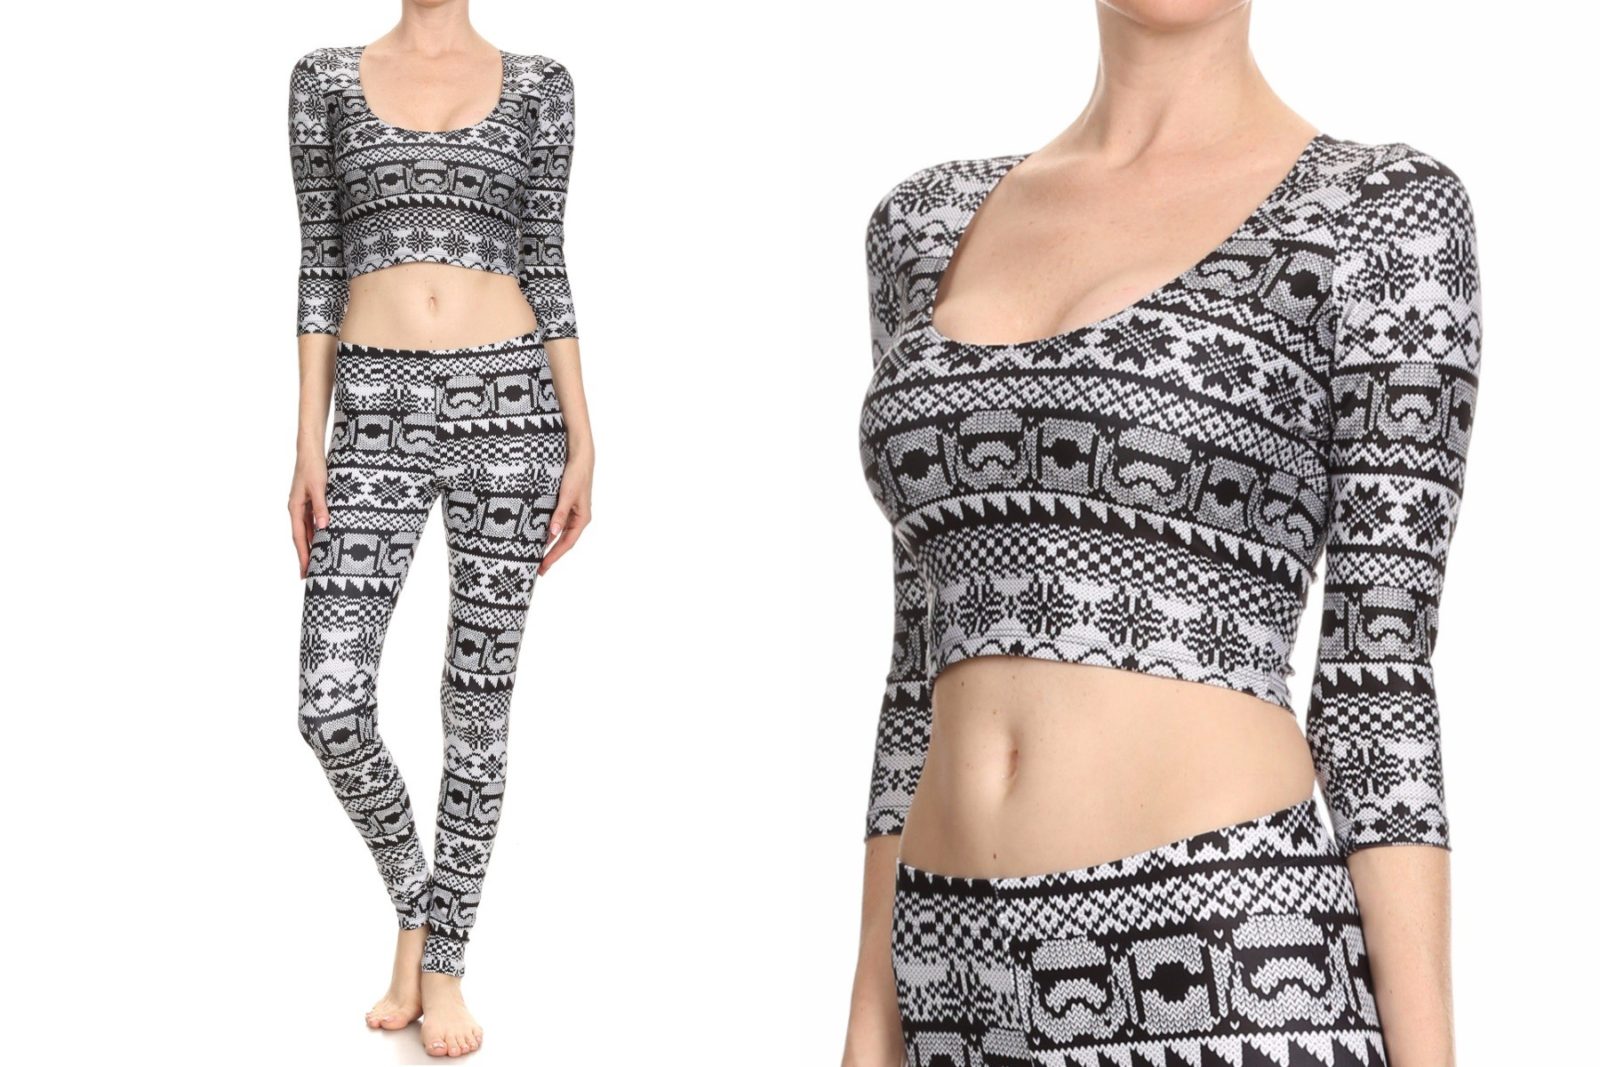 New Star Wars themed Trooper Fair Isle collection by Poprageous